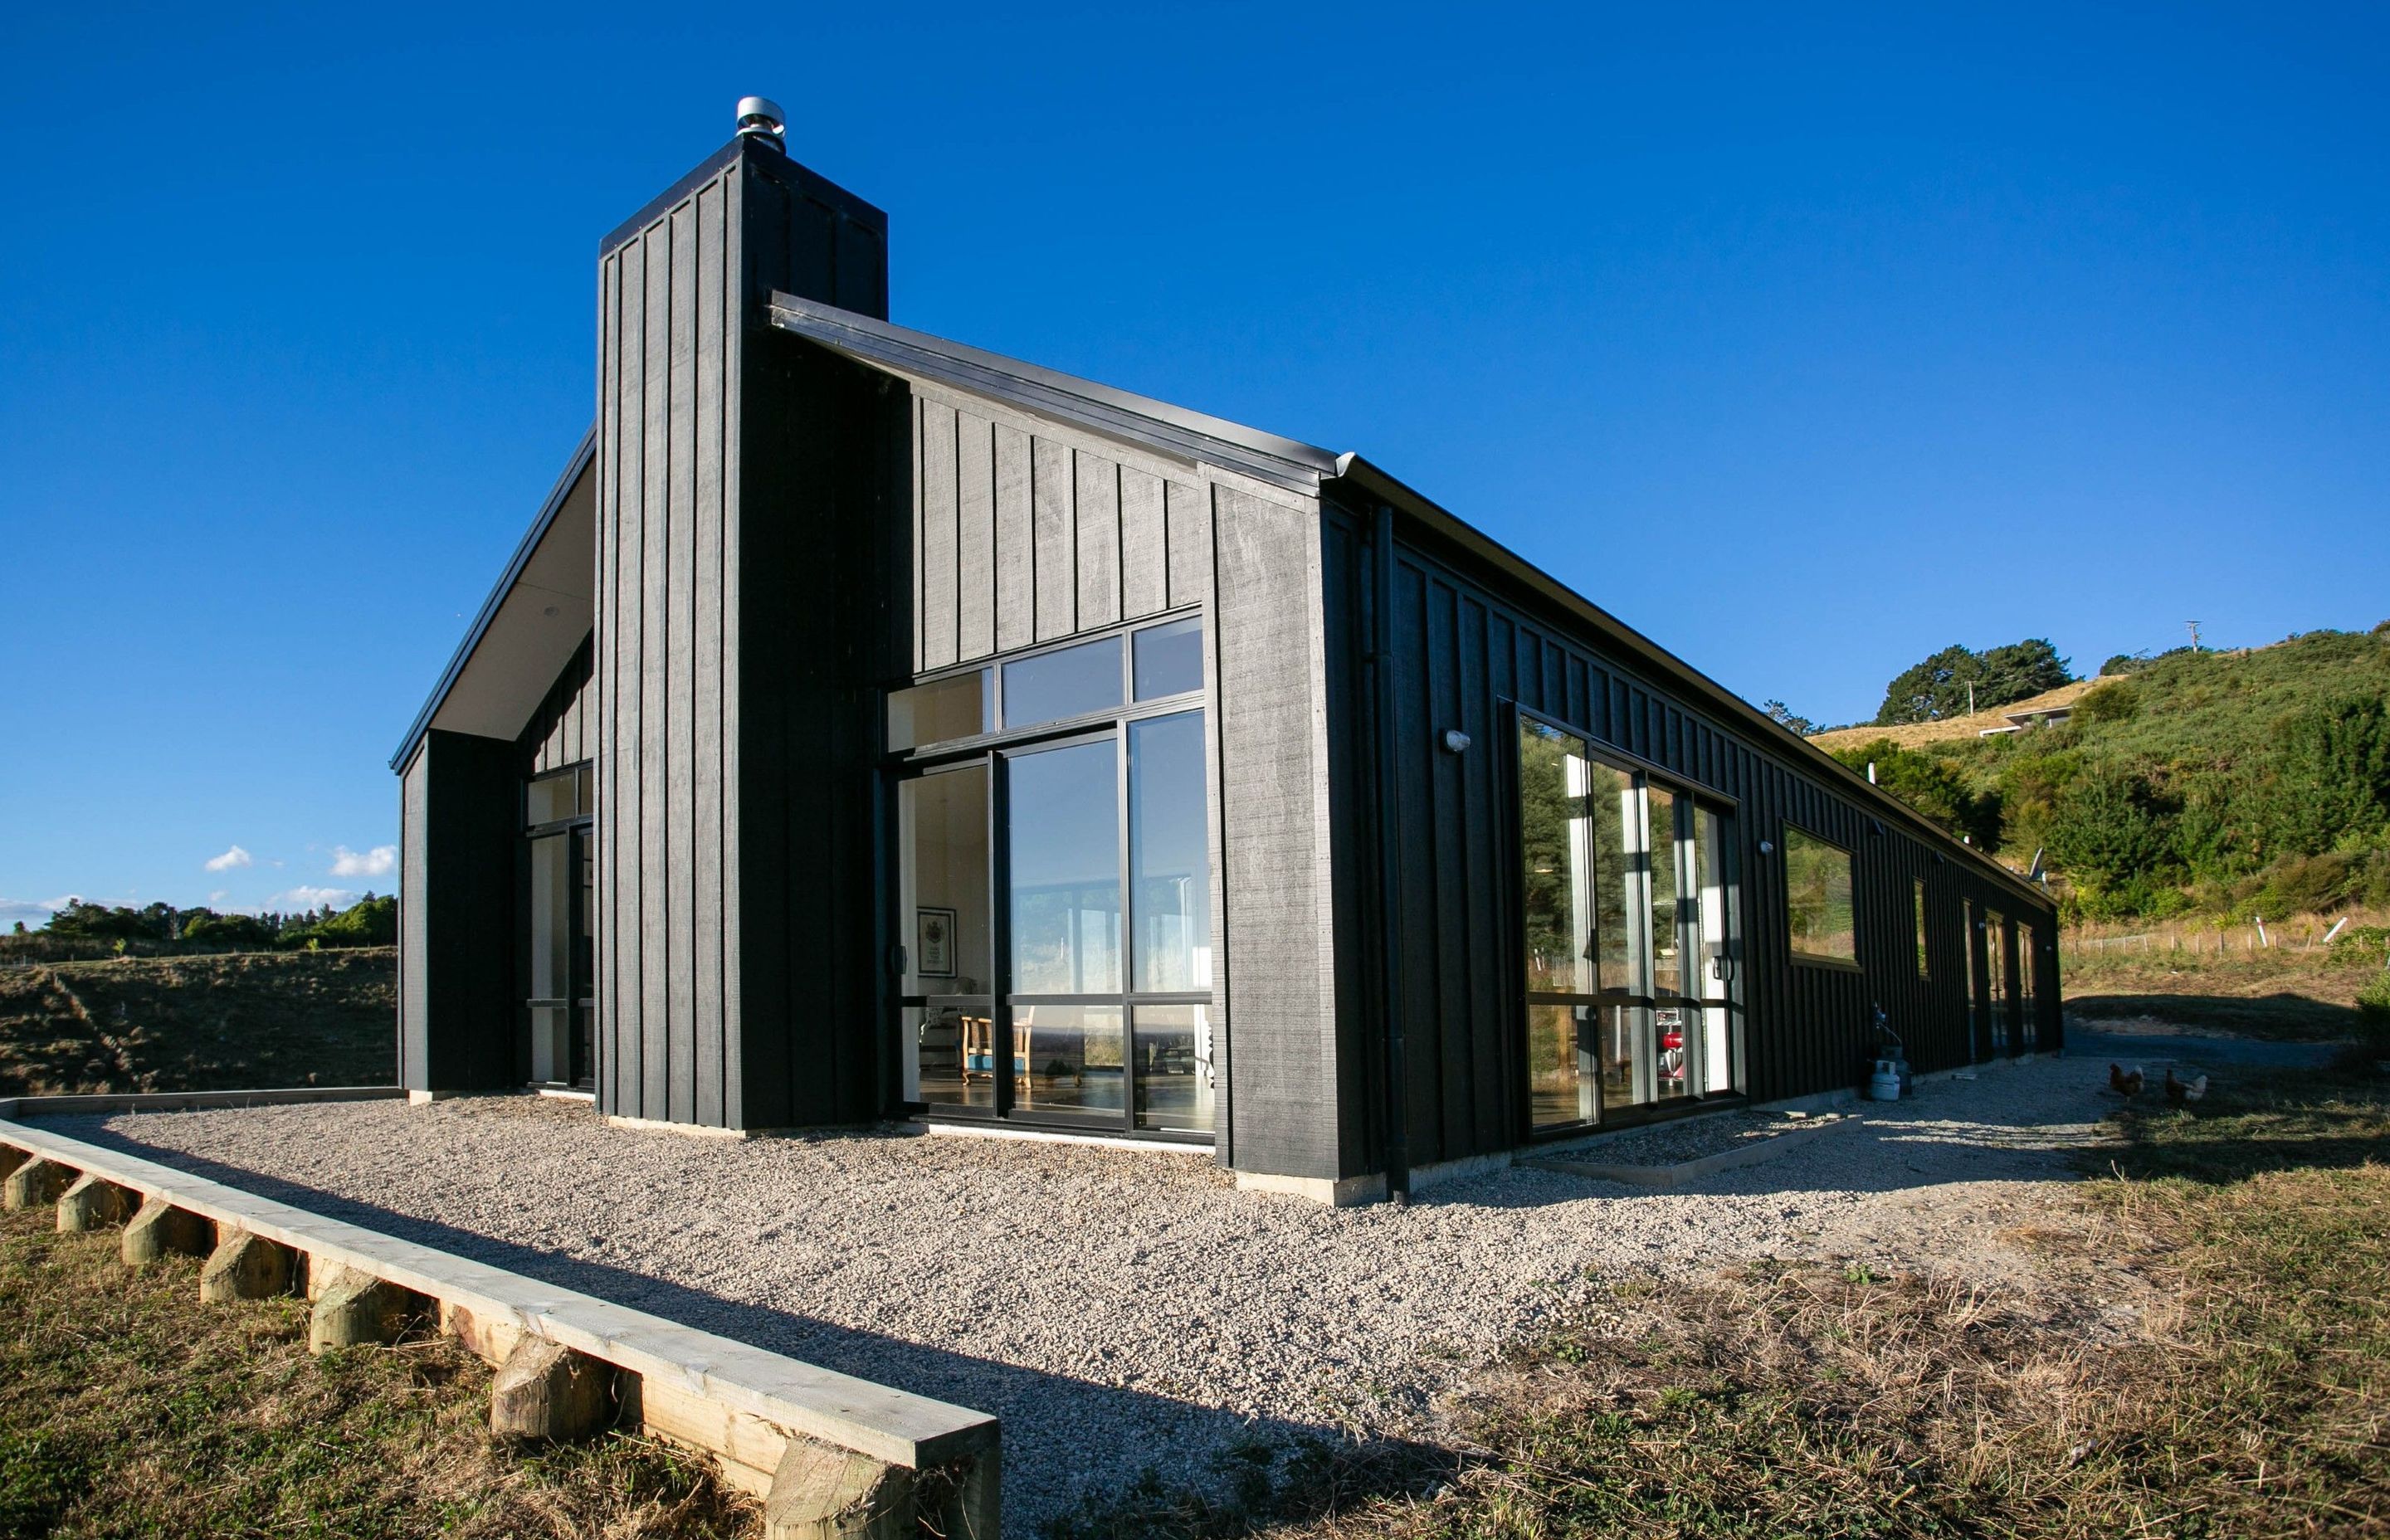 A seamless finish is achieved using the Enduroclad system on this high-stud farm house.